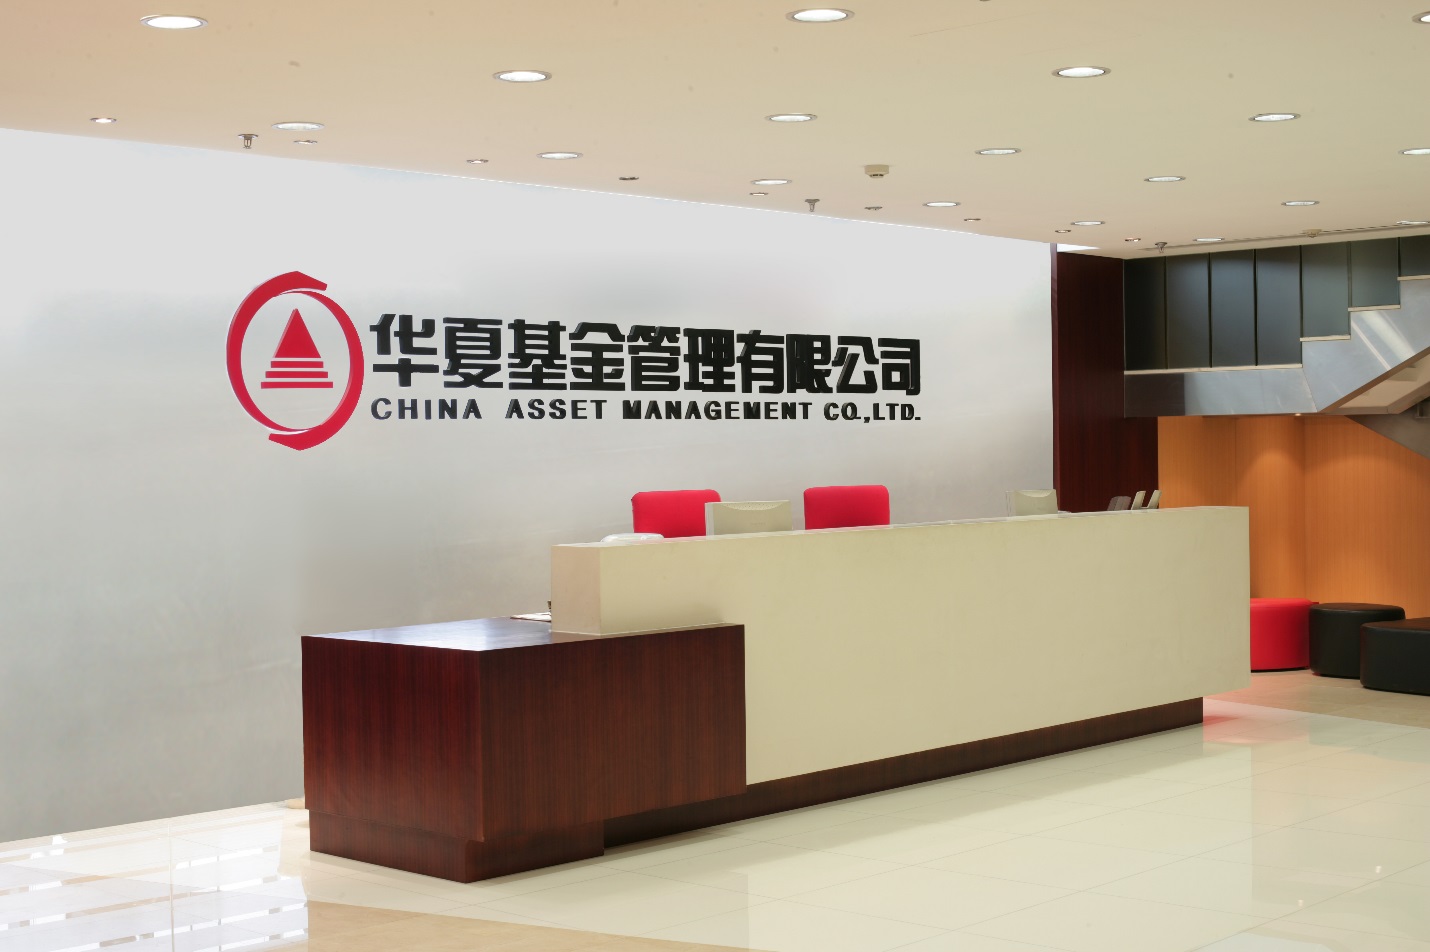 Huaxia Fund: "Siku Quanshu" to create a new benchmark for knowledge services